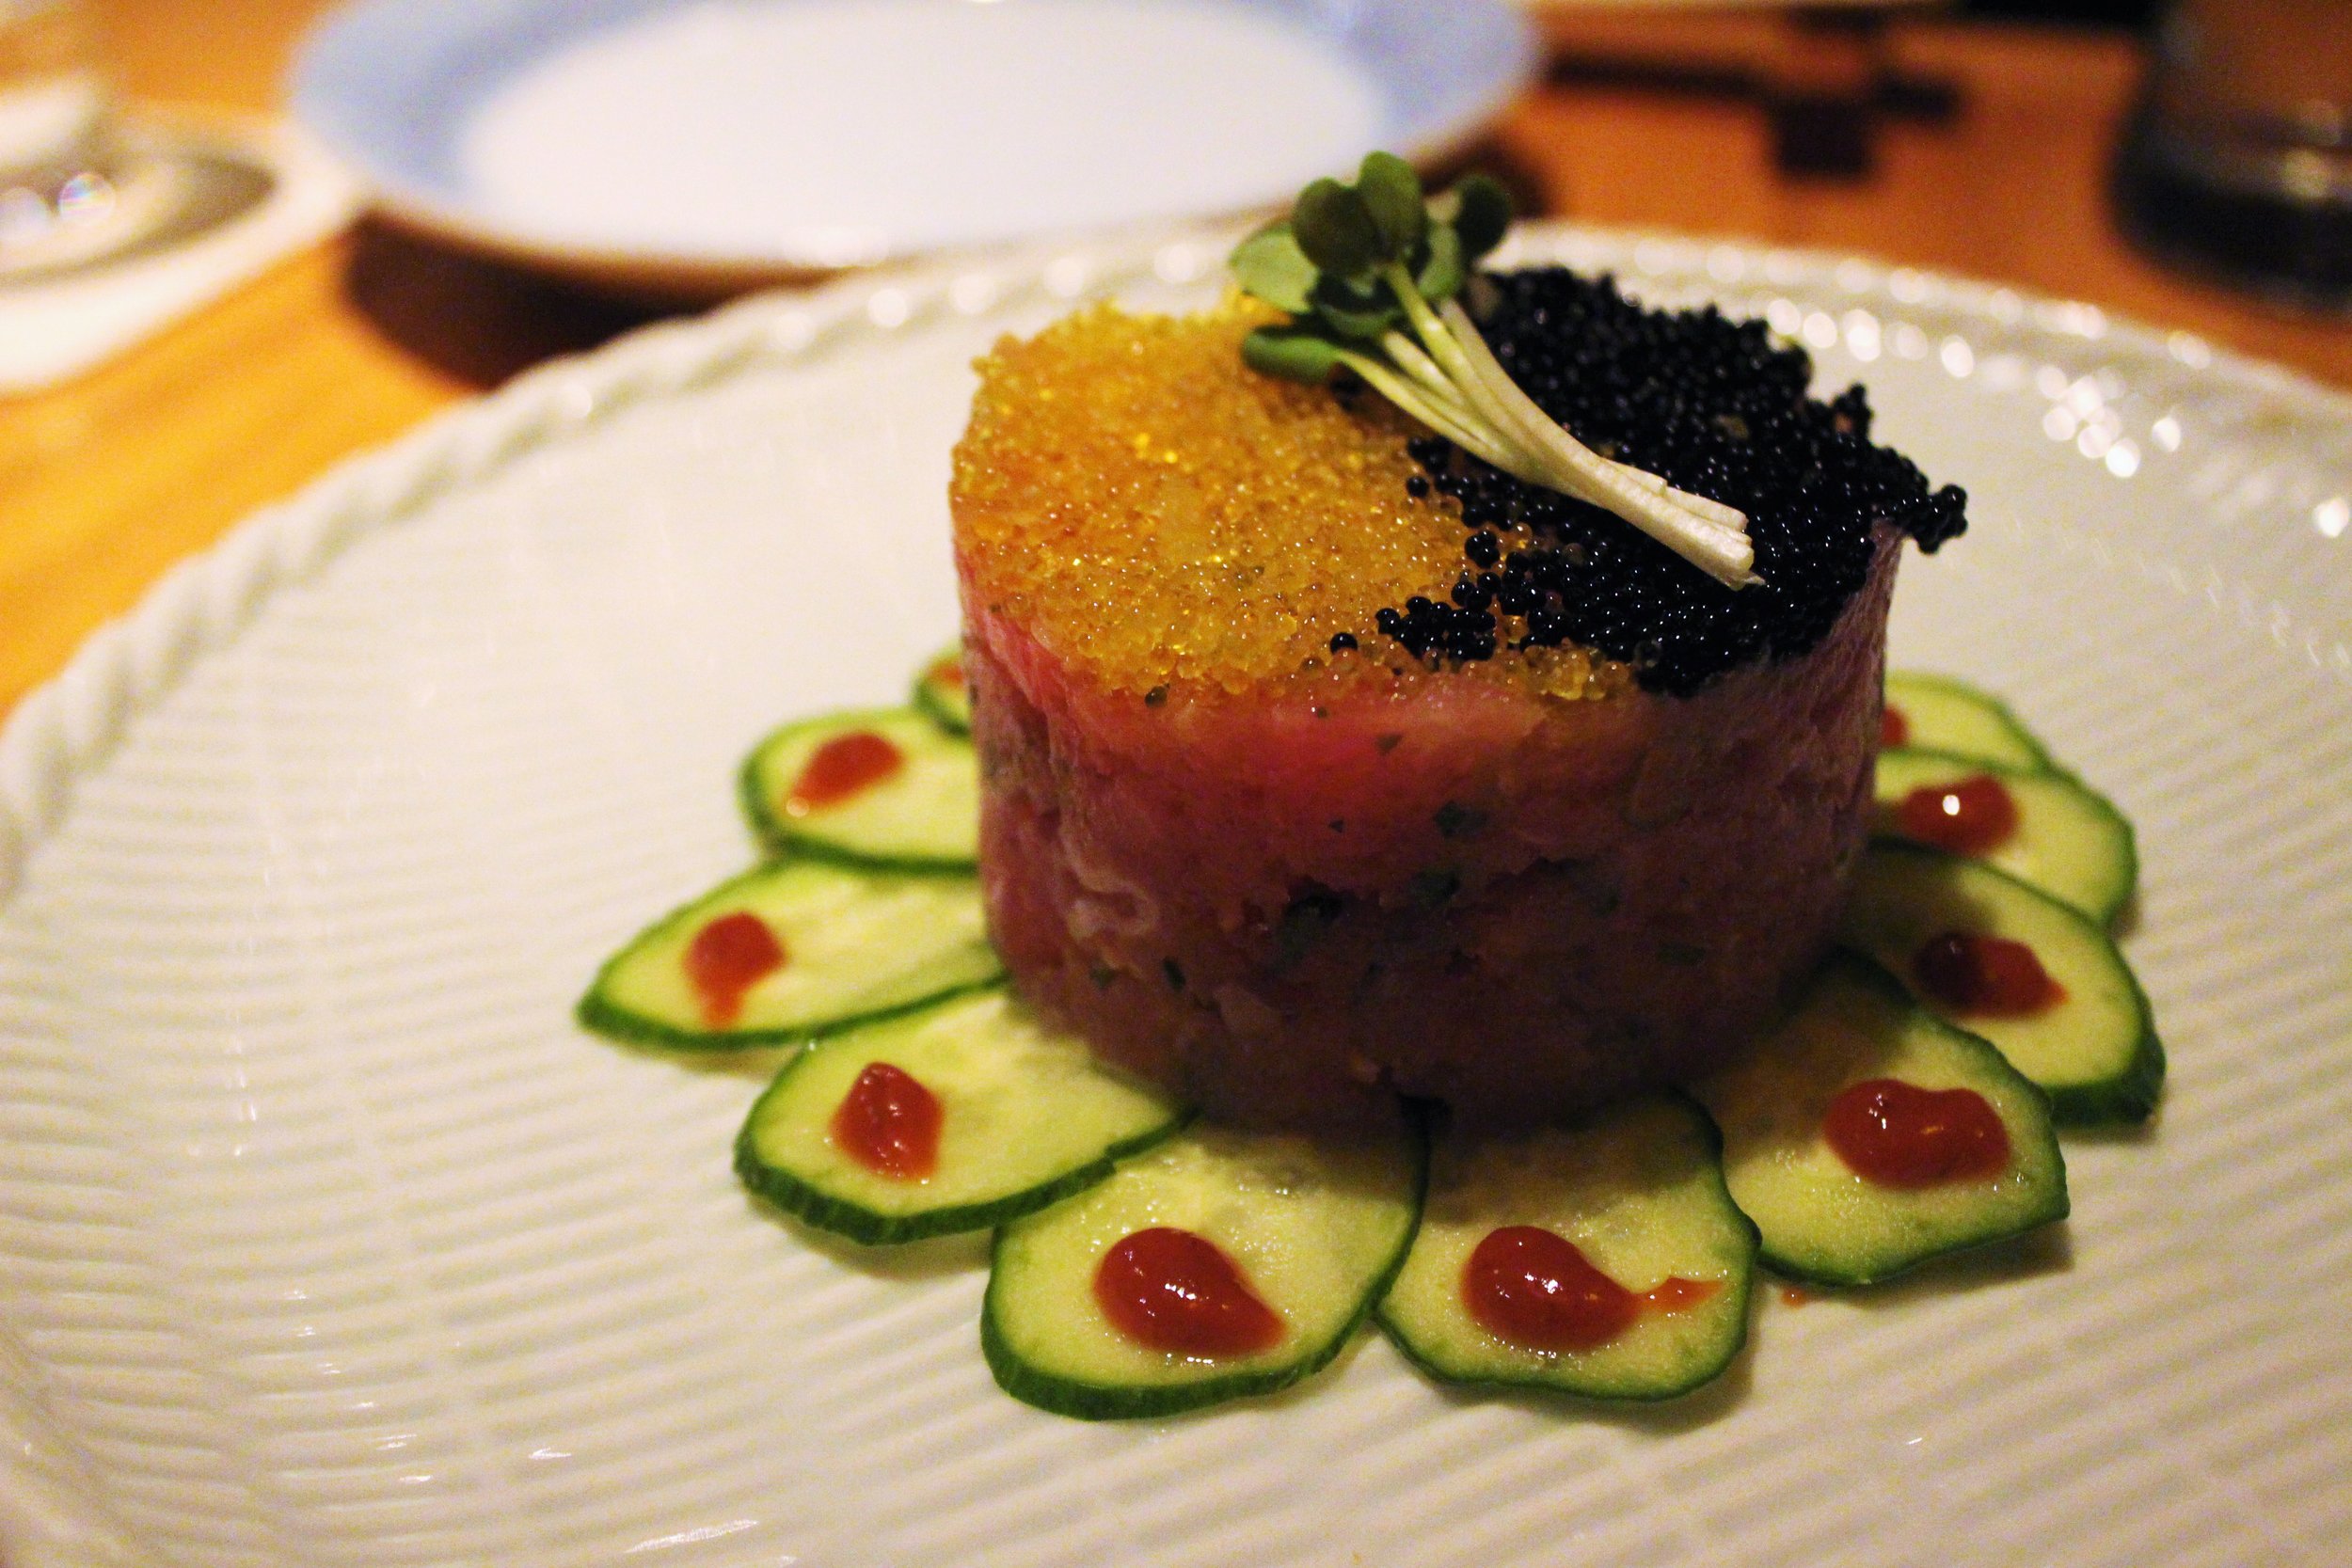 Maguro Tartar: Chopped Tuna with Flying Fish Roe and Steeped in Yuzu and Caviar